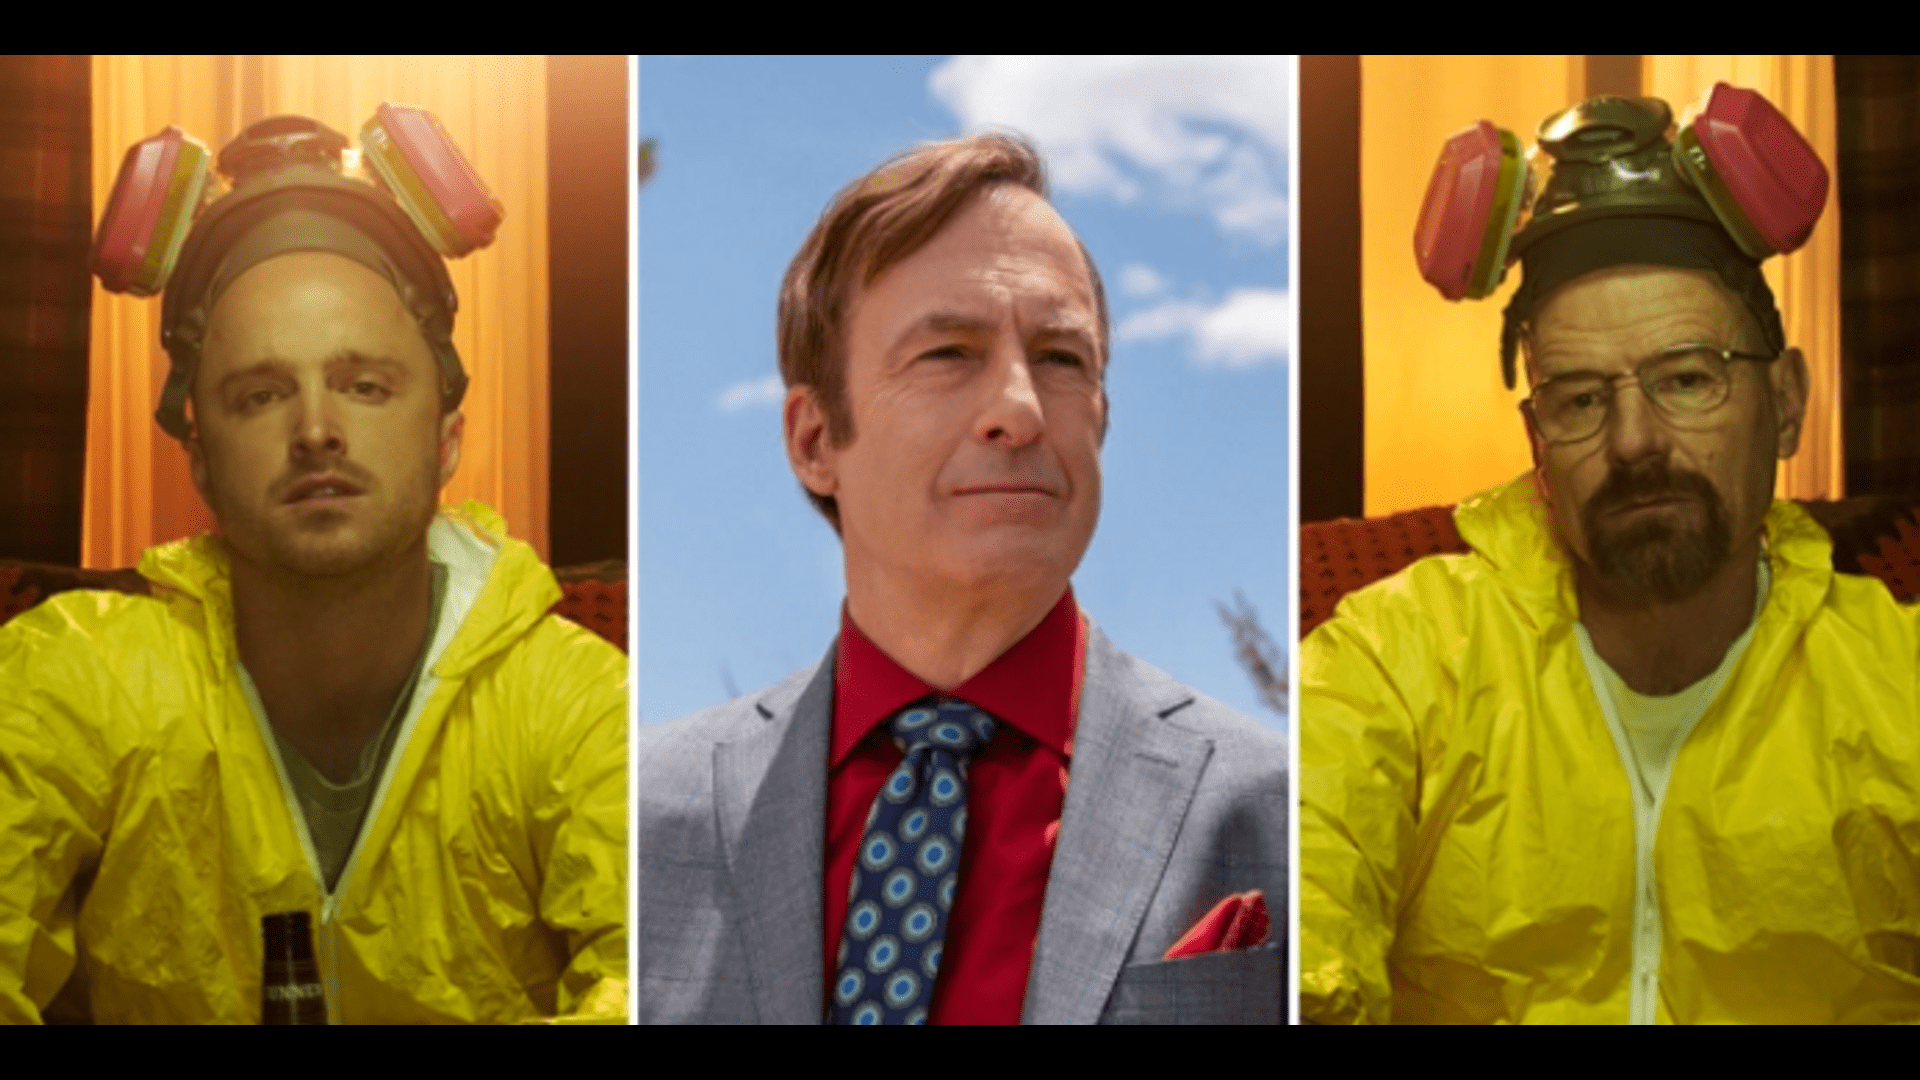 ”bryan-cranston-and-aaron-paul-to-appear-in-better-call-saul-finale”